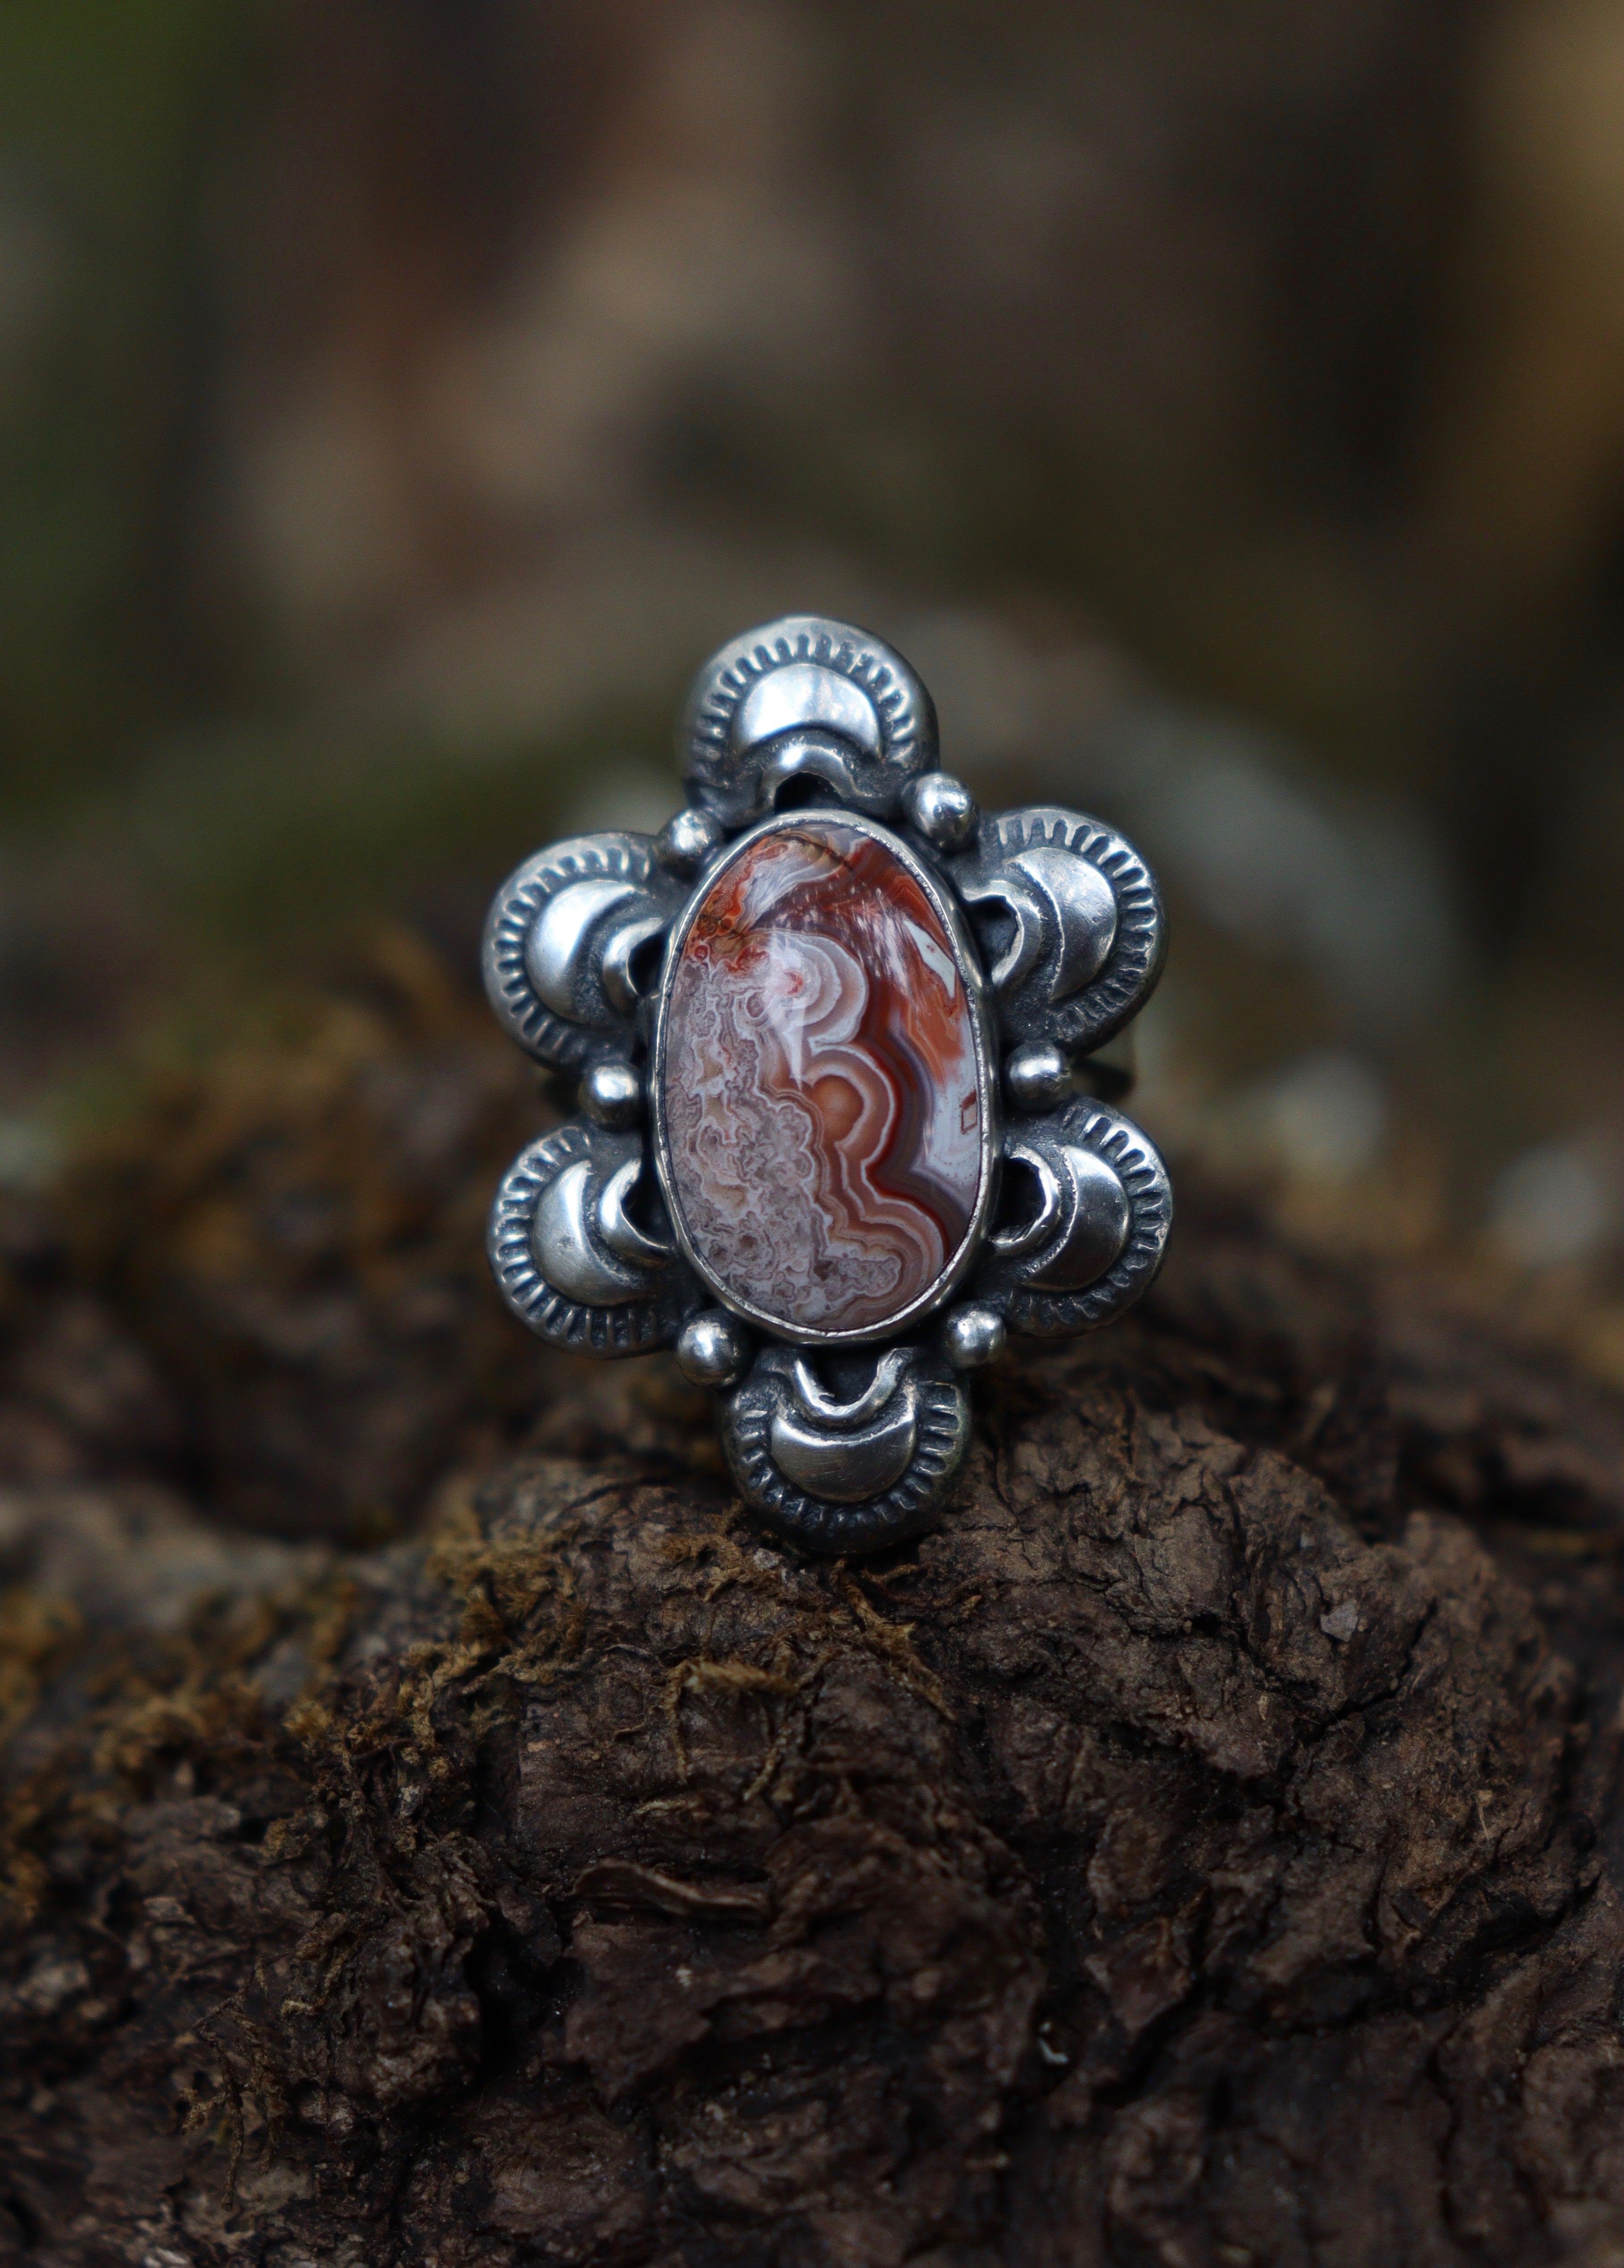 Lace Agate ring- Size 6 1/4th